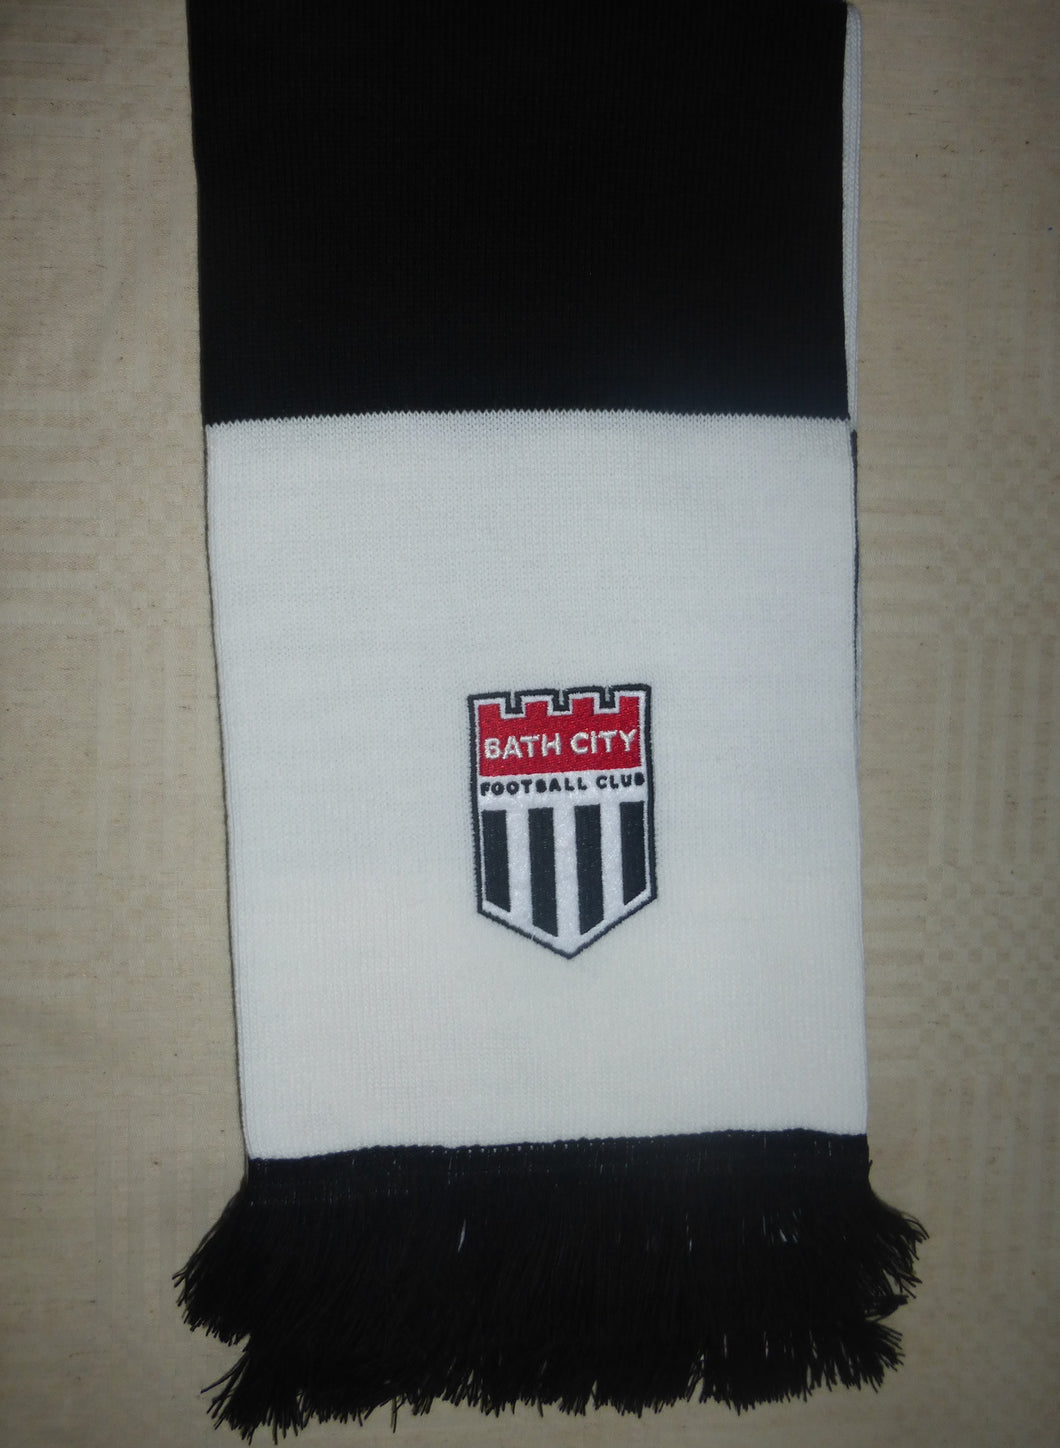 Bath City Black/White Striped Scarf - MORE STOCK COMING SOON